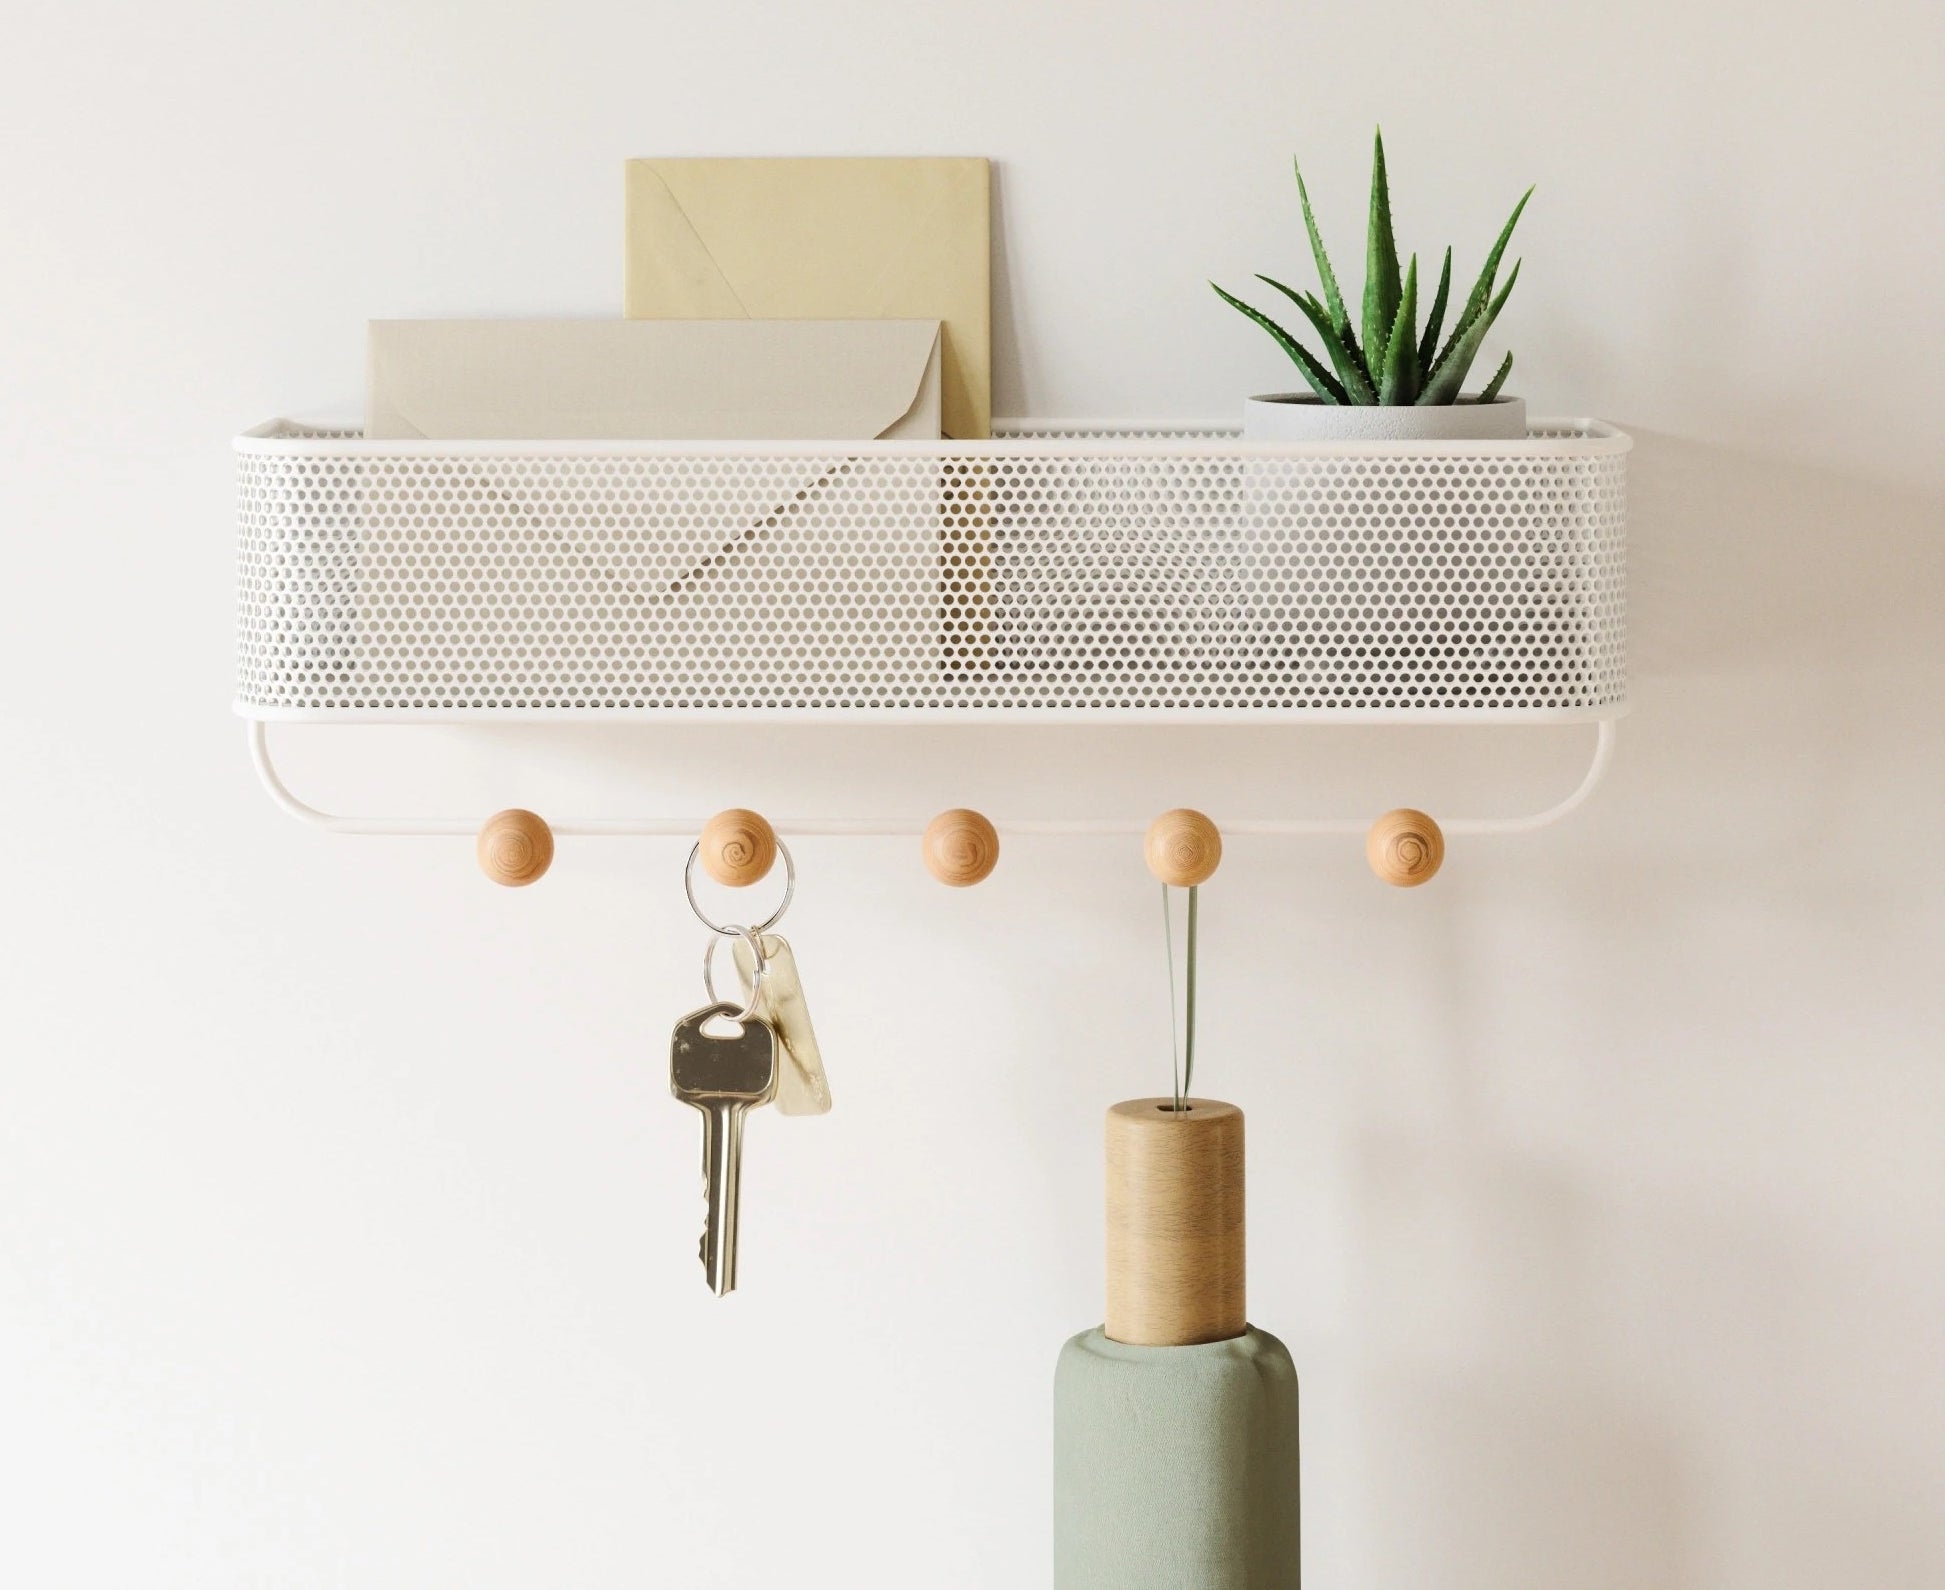 The organizer on a plain wall with keys and an umbrella hanging from it and letters on the top shelf